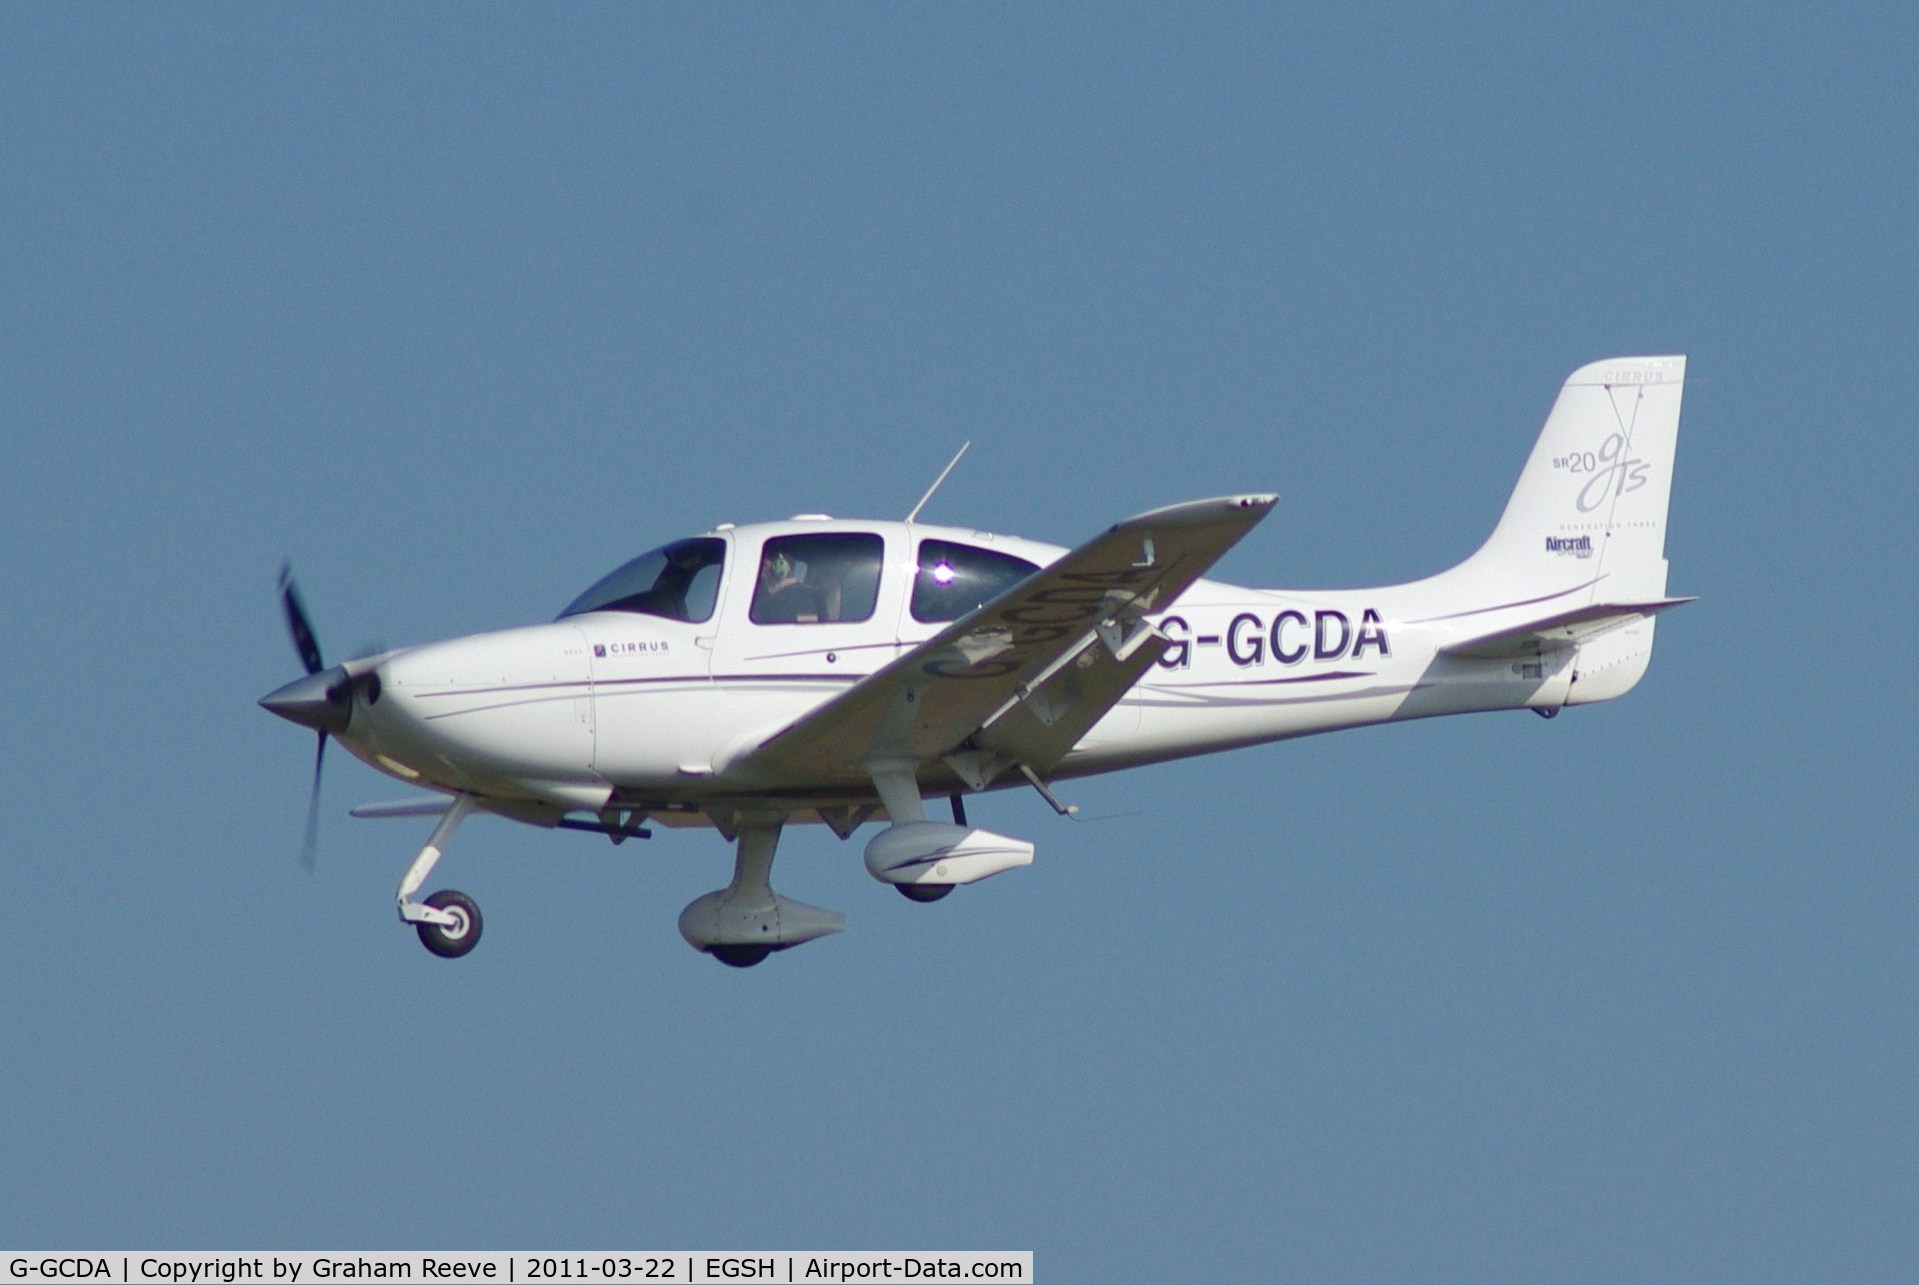 G-GCDA, 2008 Cirrus SR20 G3 GTS C/N 1962, About to touch down.